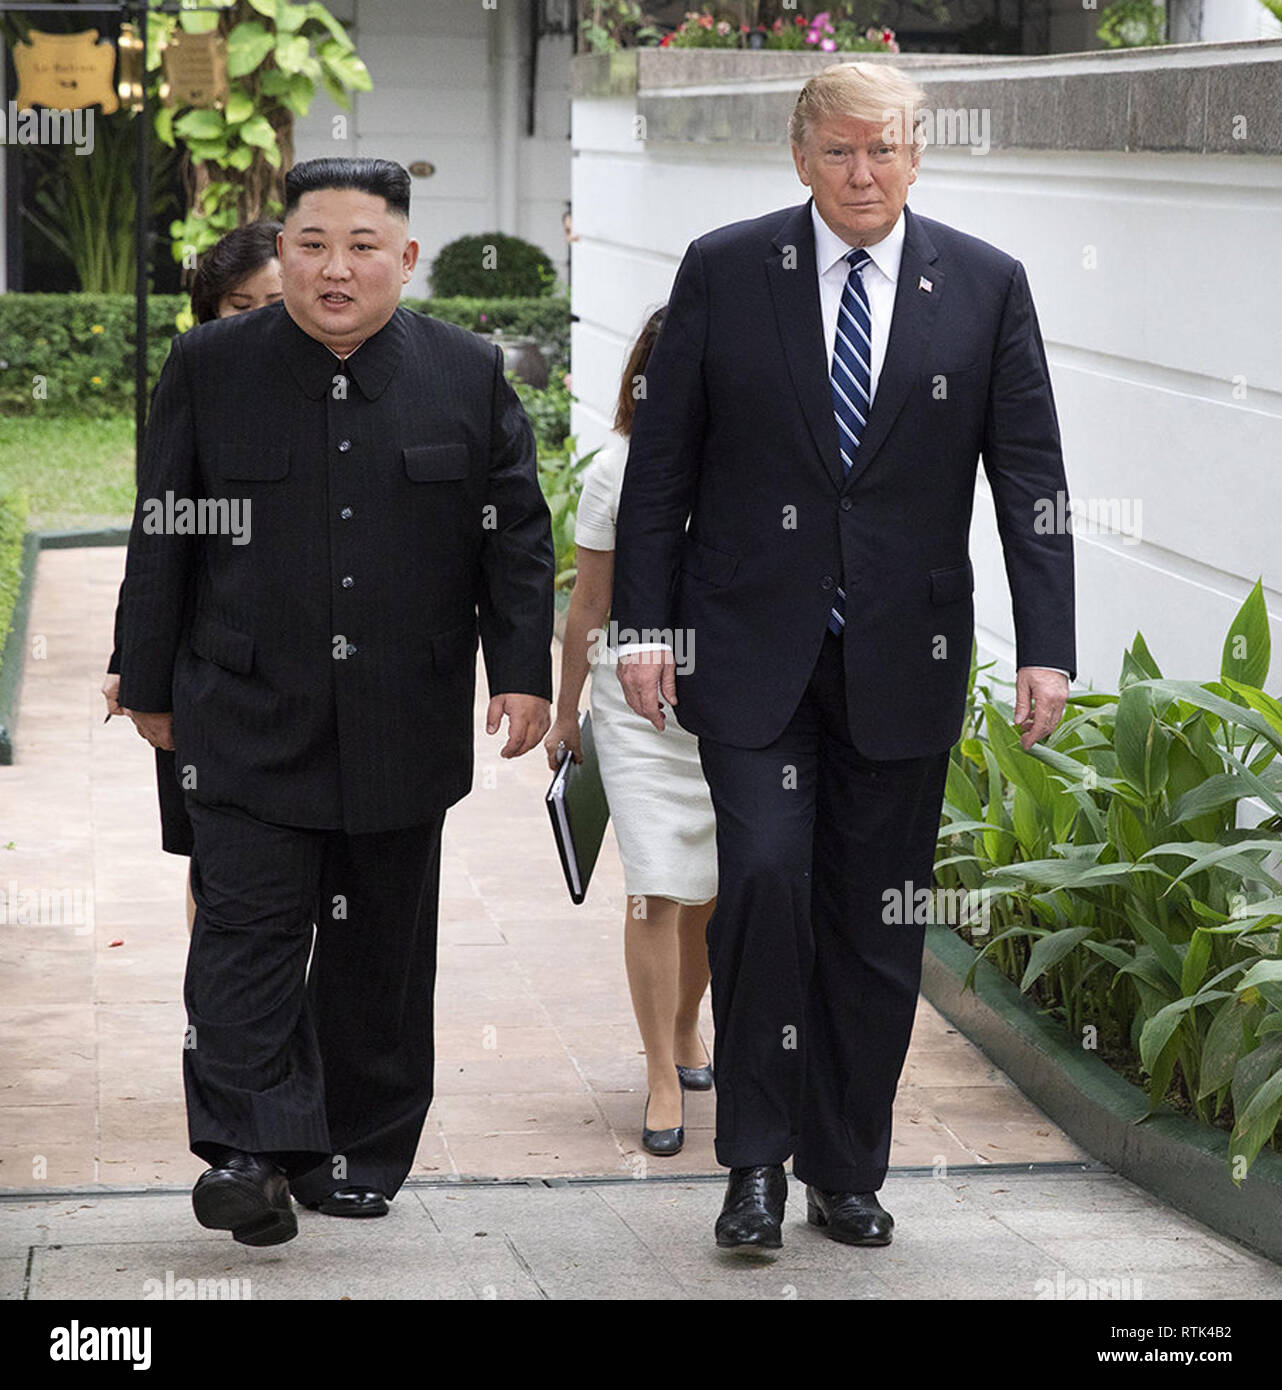 President Donald J. Trump and Kim Jong Un, Chairman of the State Affairs Commission of the Democratic People’s Republic of Korea, walk together on the pool patio Thursday, Feb. 28, 2019, at the Sofitel Legend Metropole hotel in Hanoi, prior to participating in an expanded bilateral meeting.   People:  President Donald Trump, Kim Jong Un Stock Photo